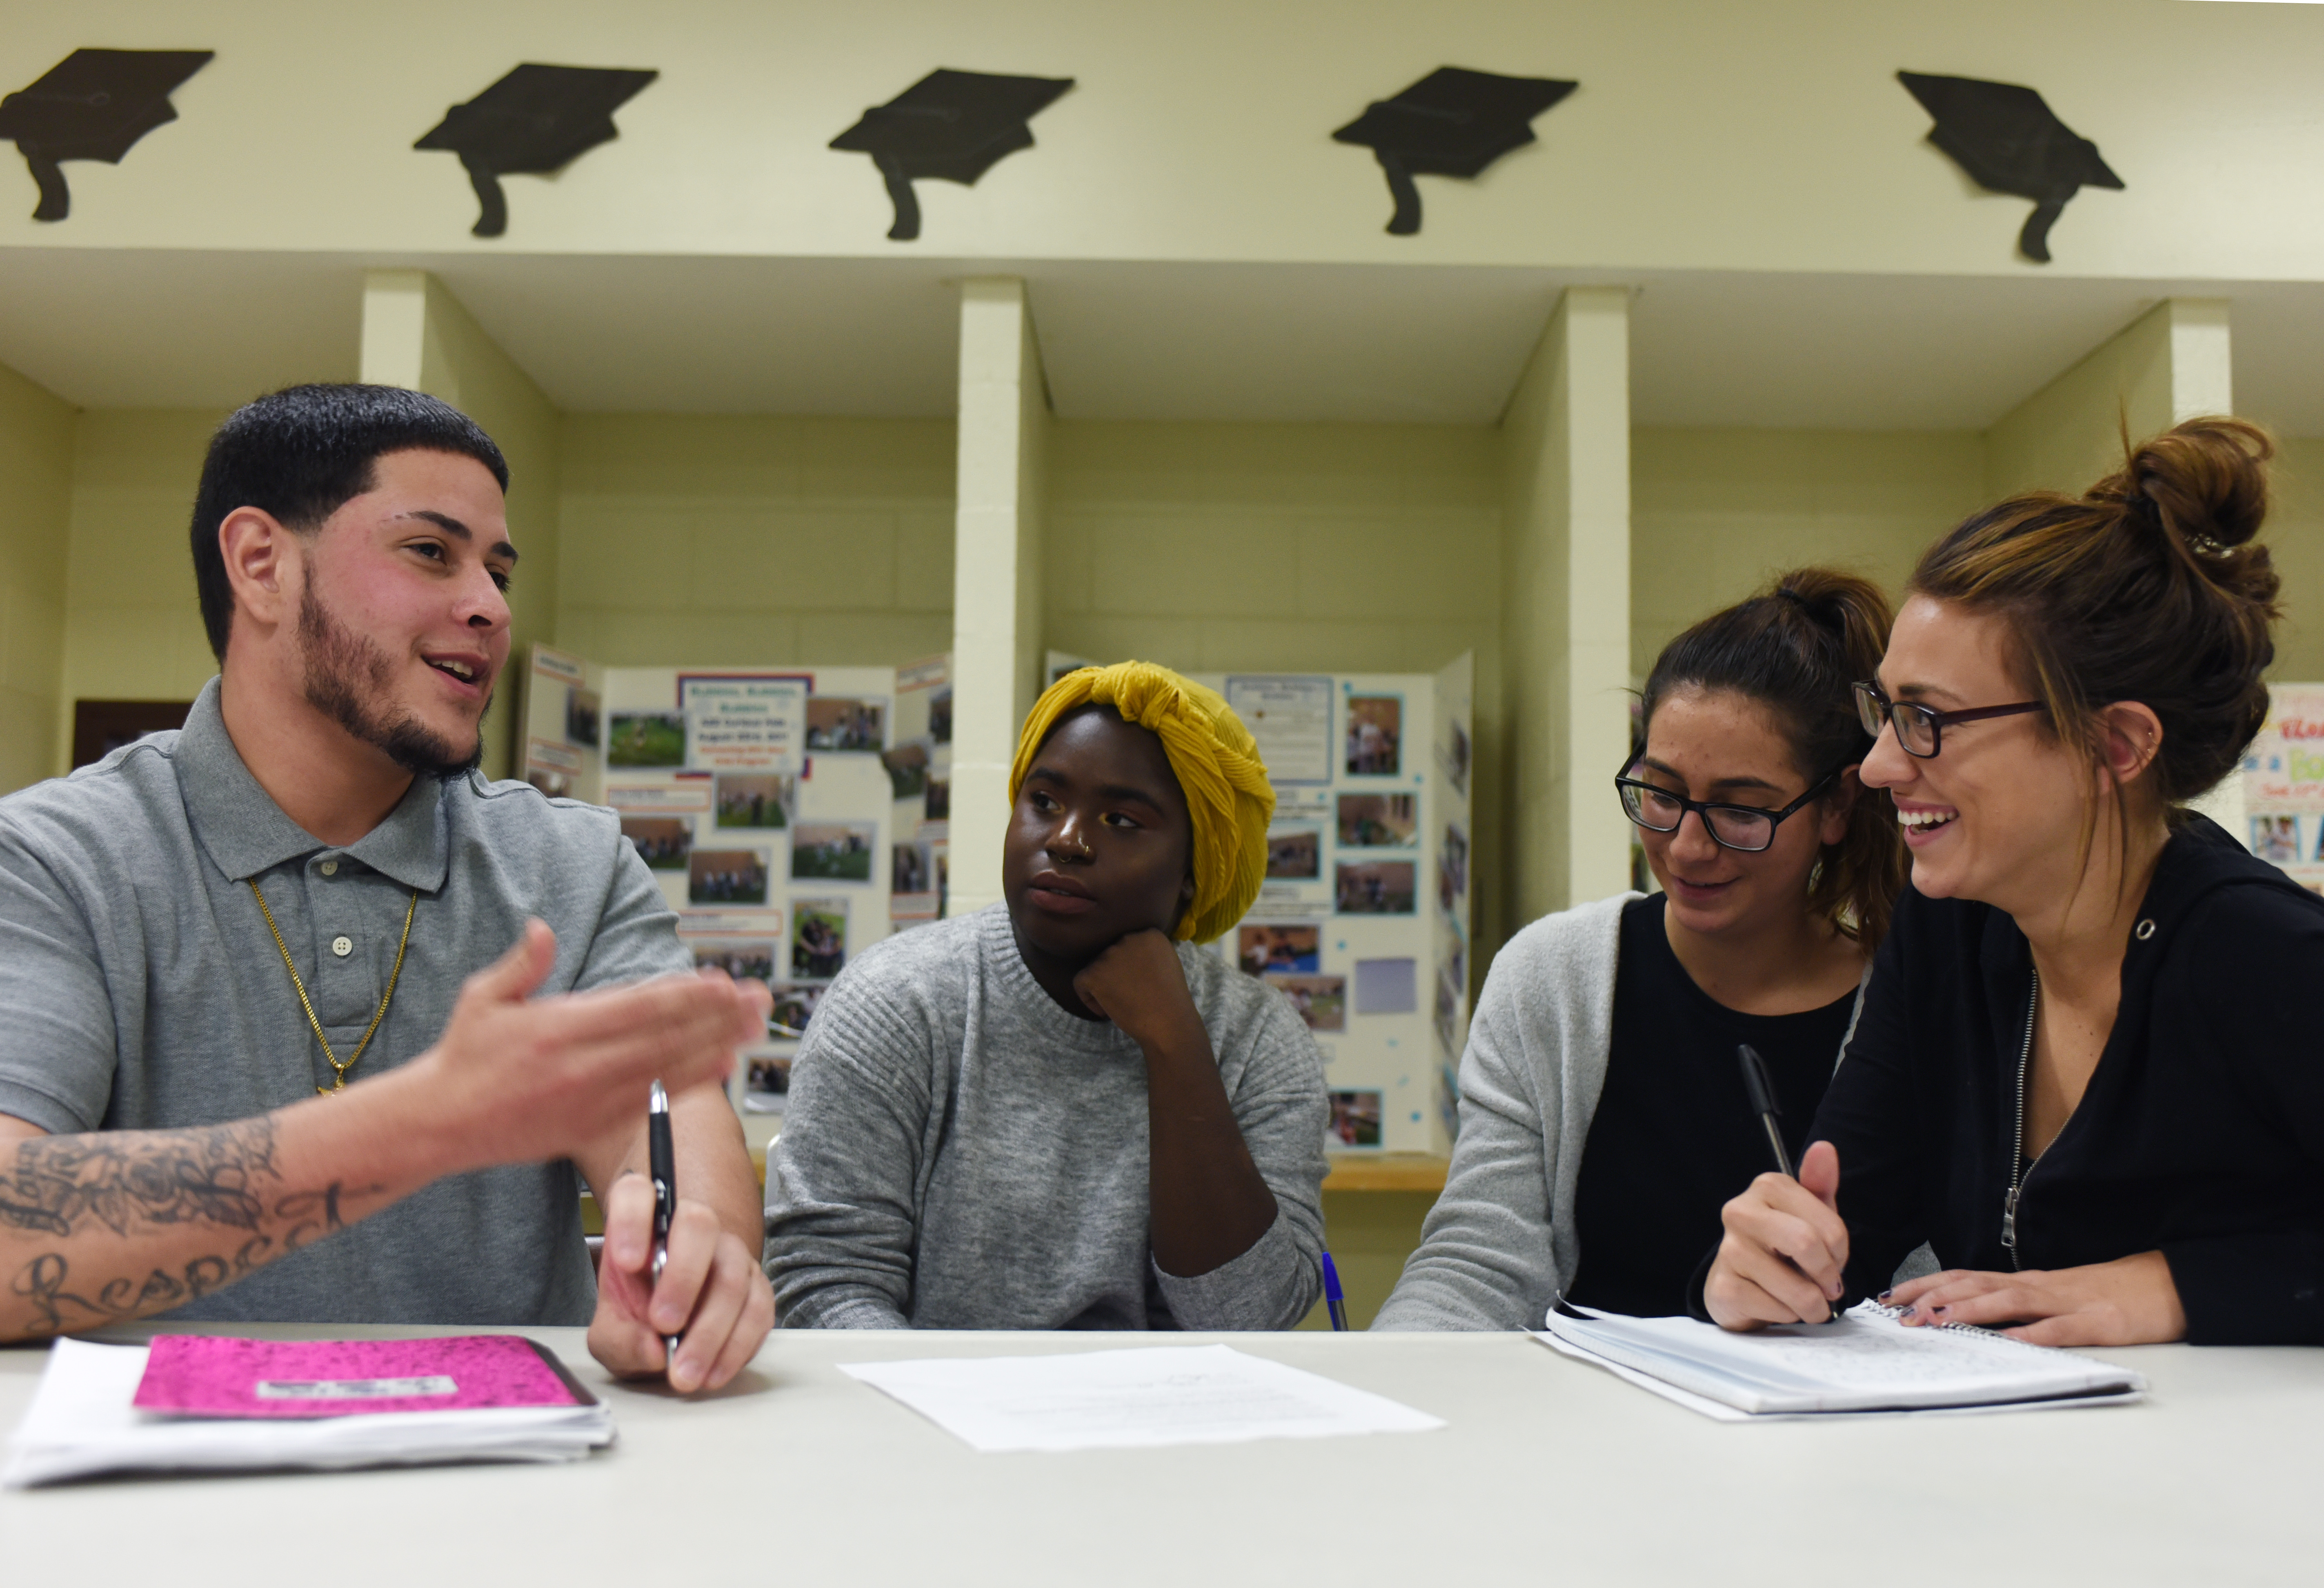 Students (from left) including inmate Josh Feliciano, Talya Sogoba, Danielle Haley, and Rhiannon Snide in the UMass social justice journalism and mass incarceration class taught at the Hampshire County Jail and House of Correction in Northampton, Massachusetts